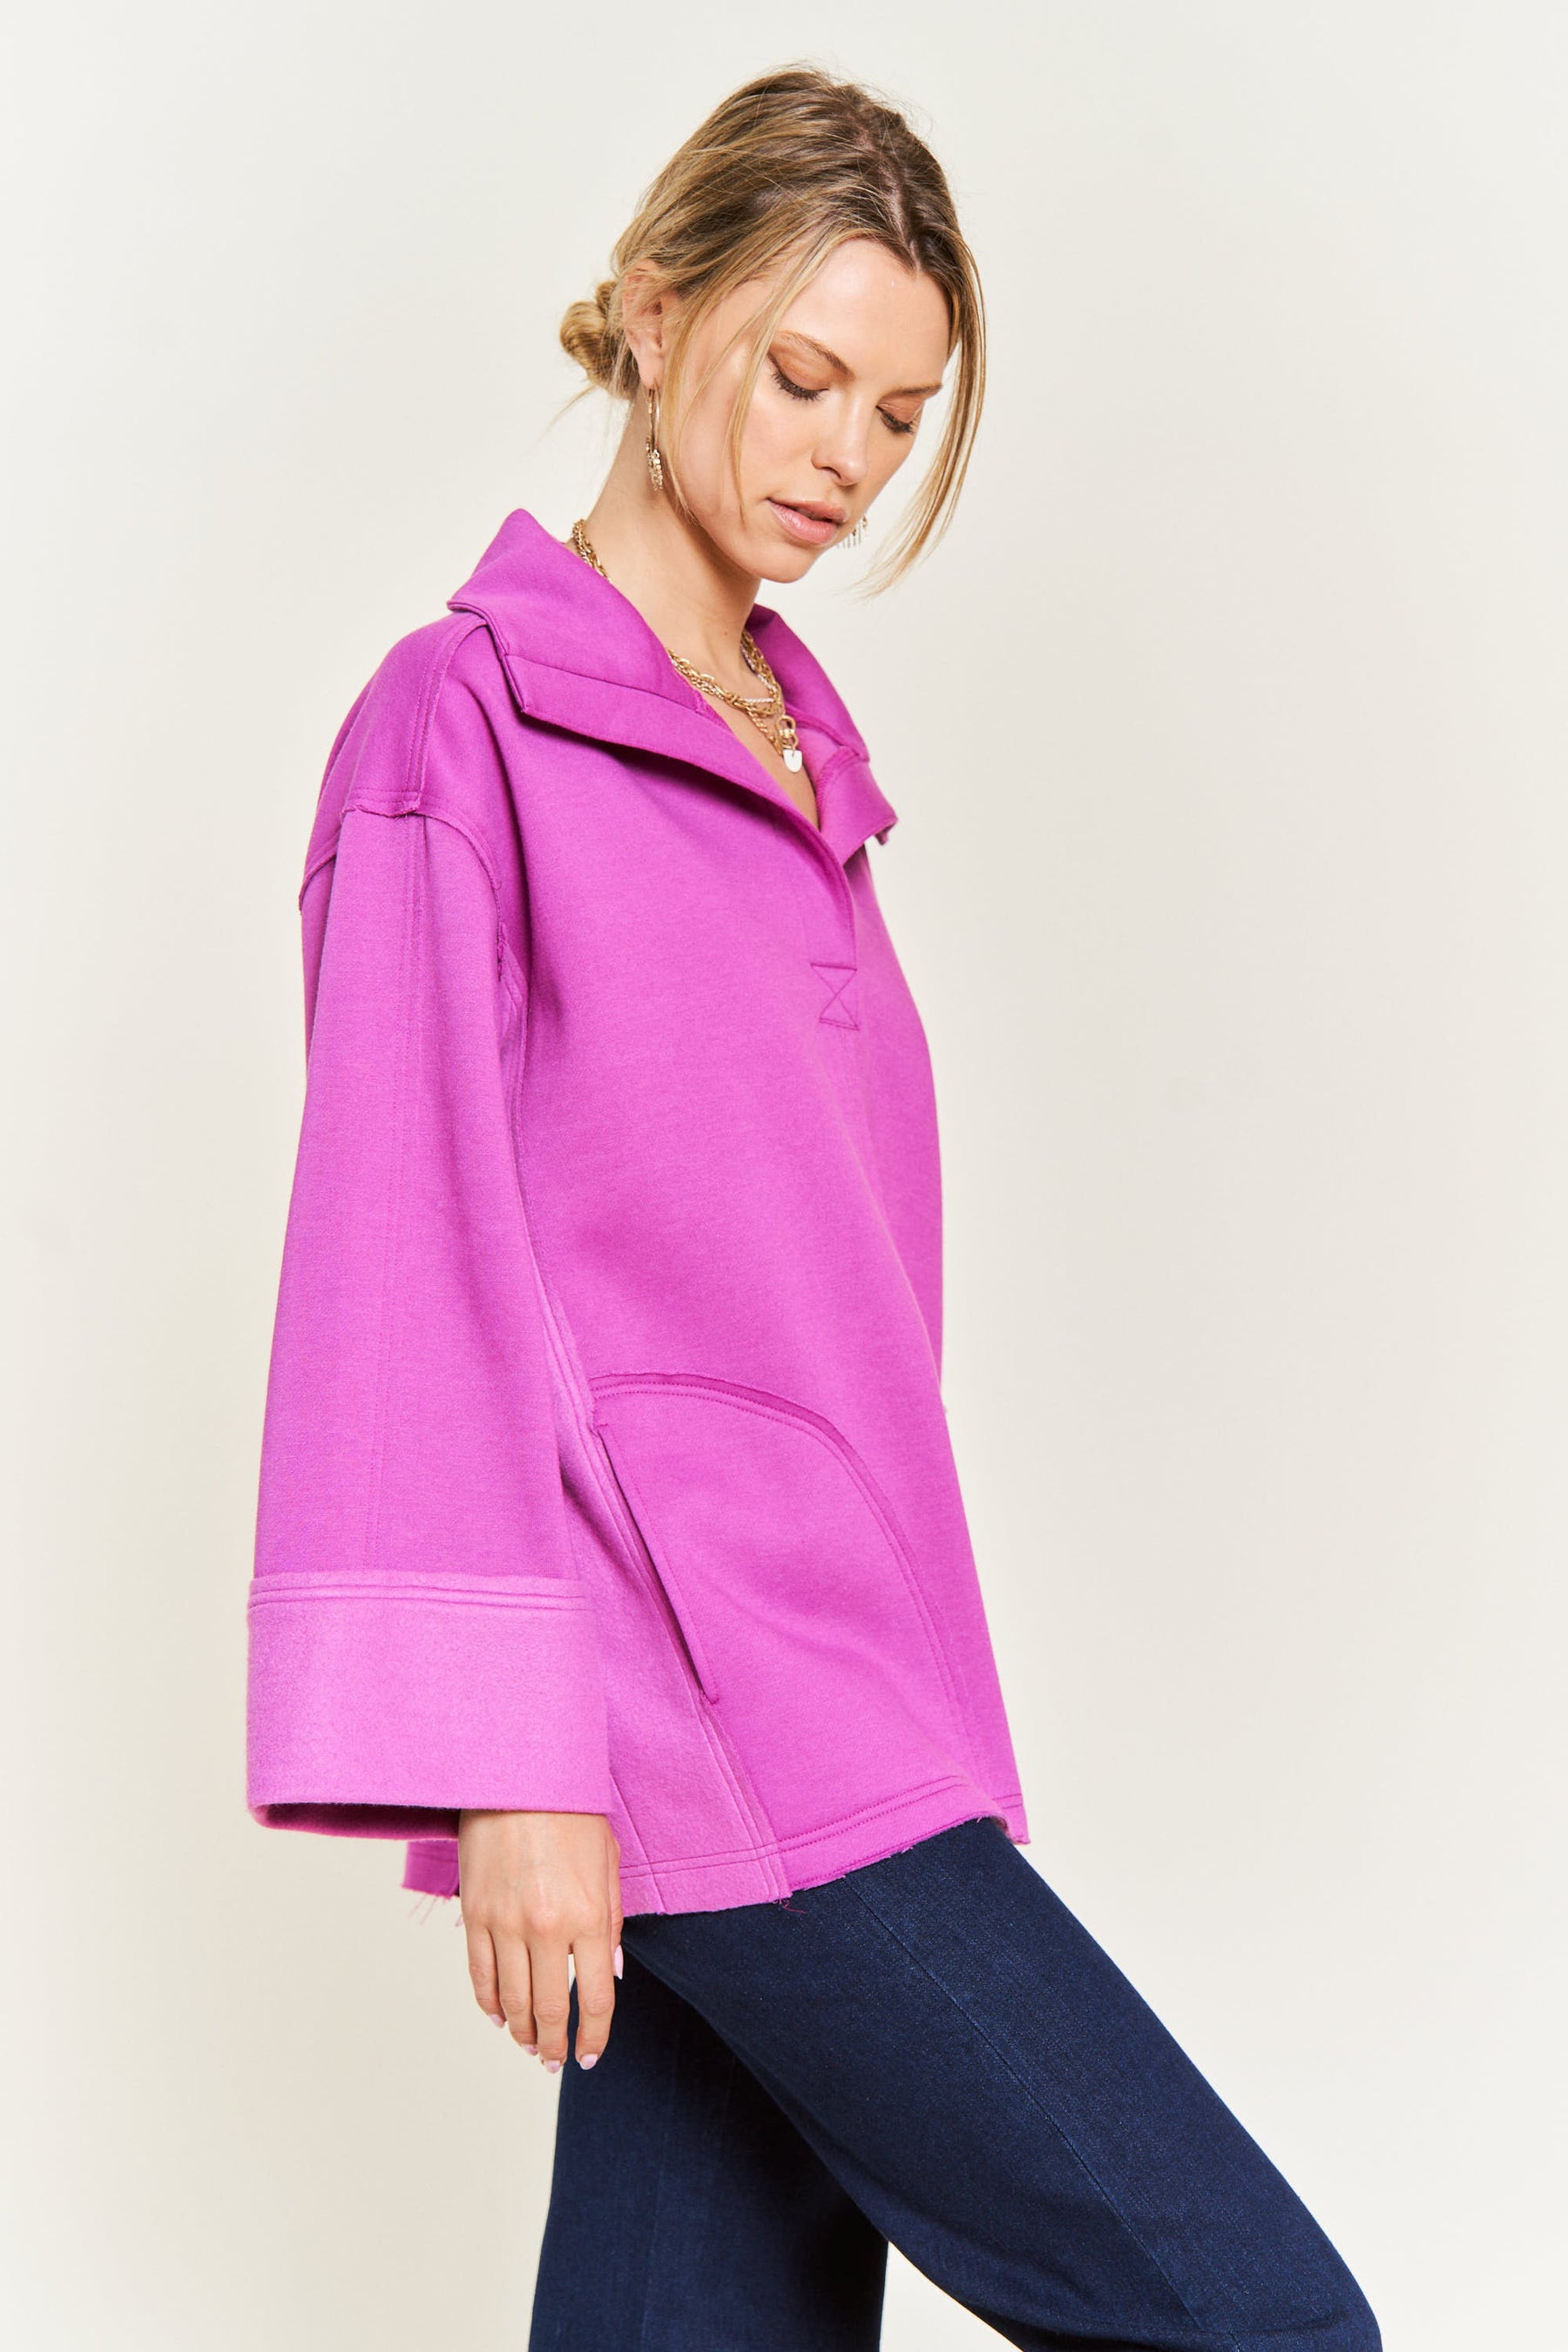 Together At Last Collared Pullover - Magenta